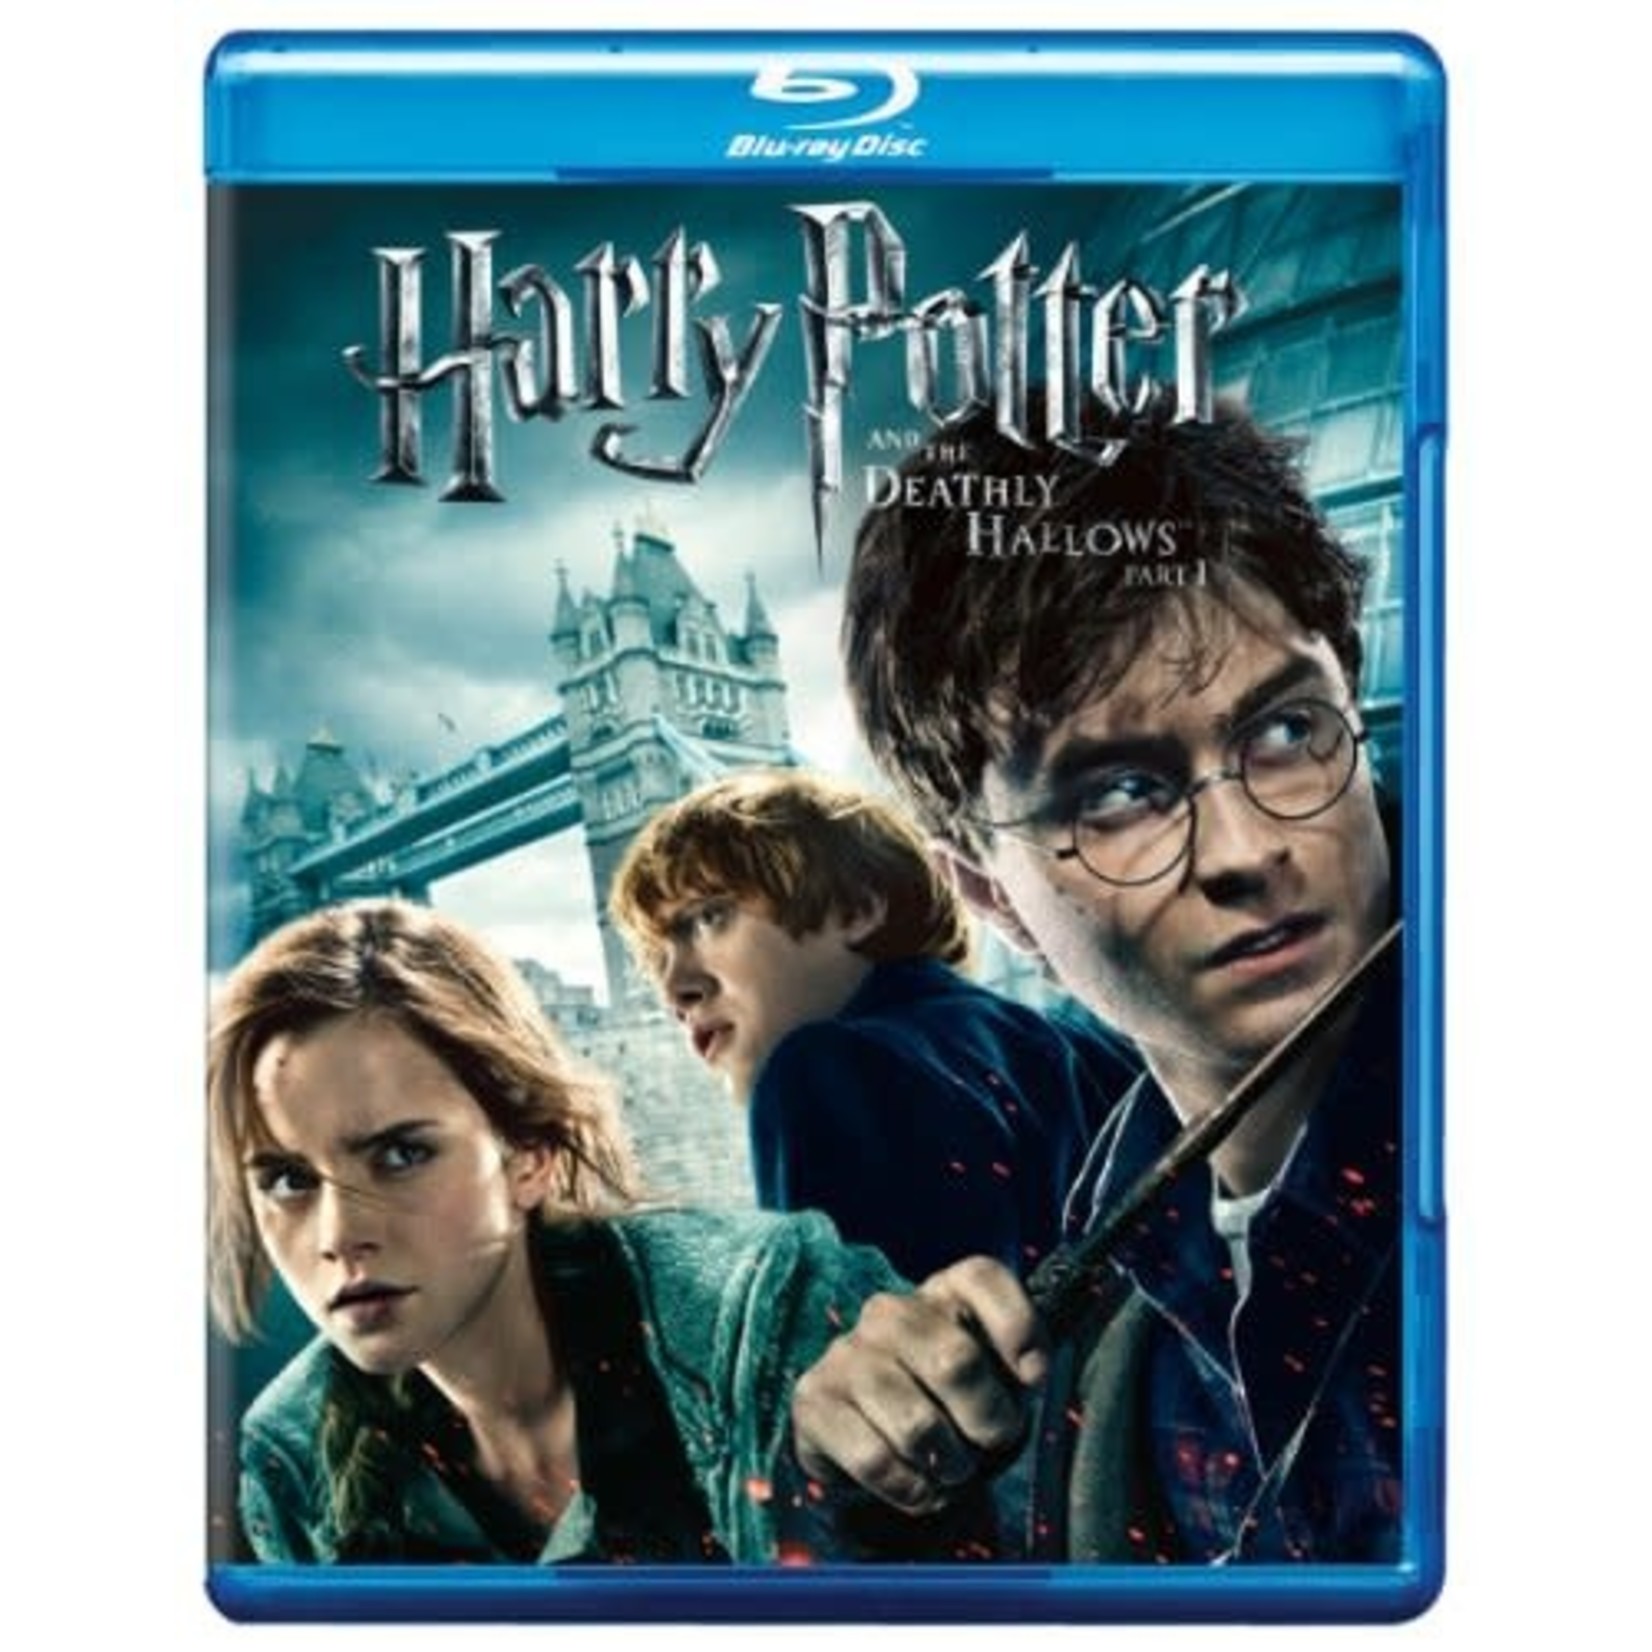 harry-potter-year-7-and-the-deathly-hallows-pt-1-used-brd-the-odds-sods-shoppe